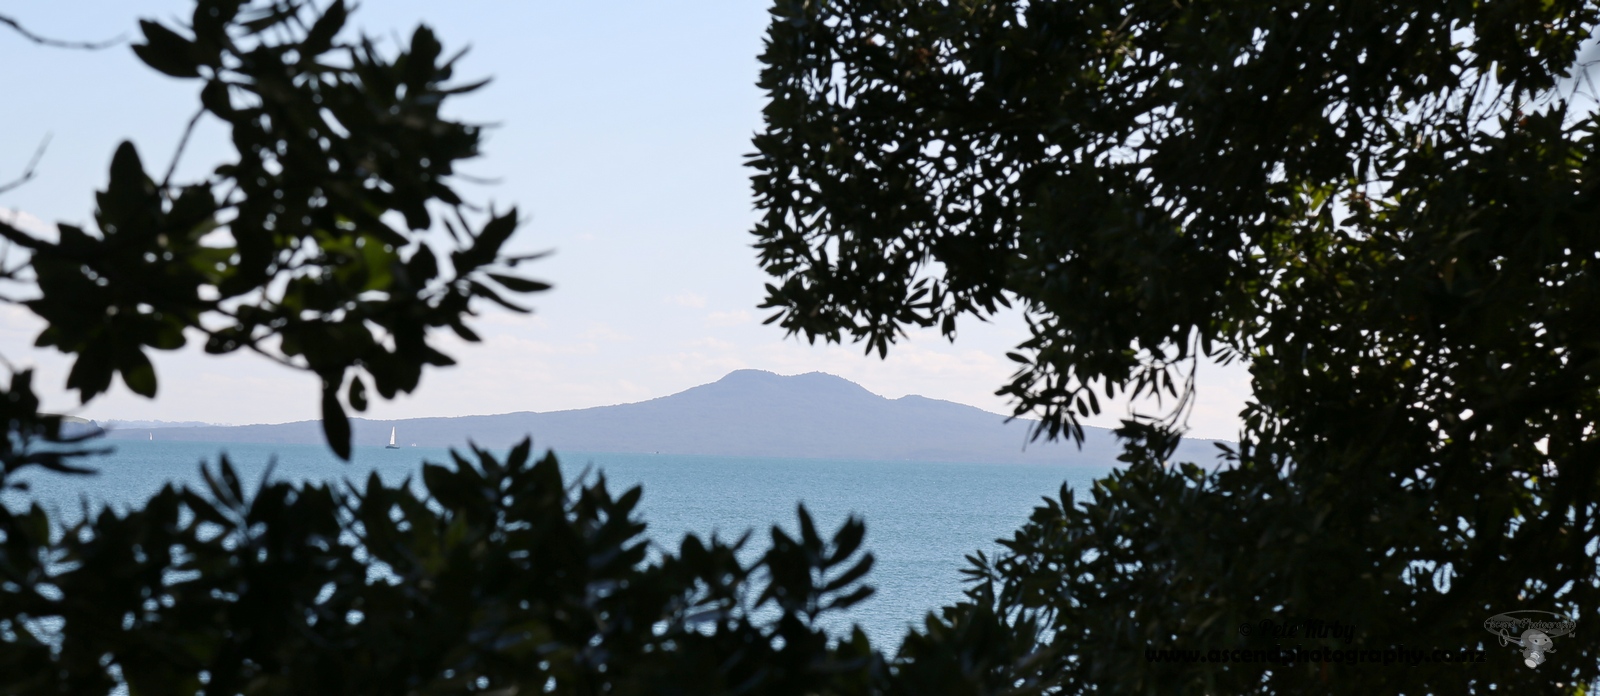 Rangitoto from Beachlands